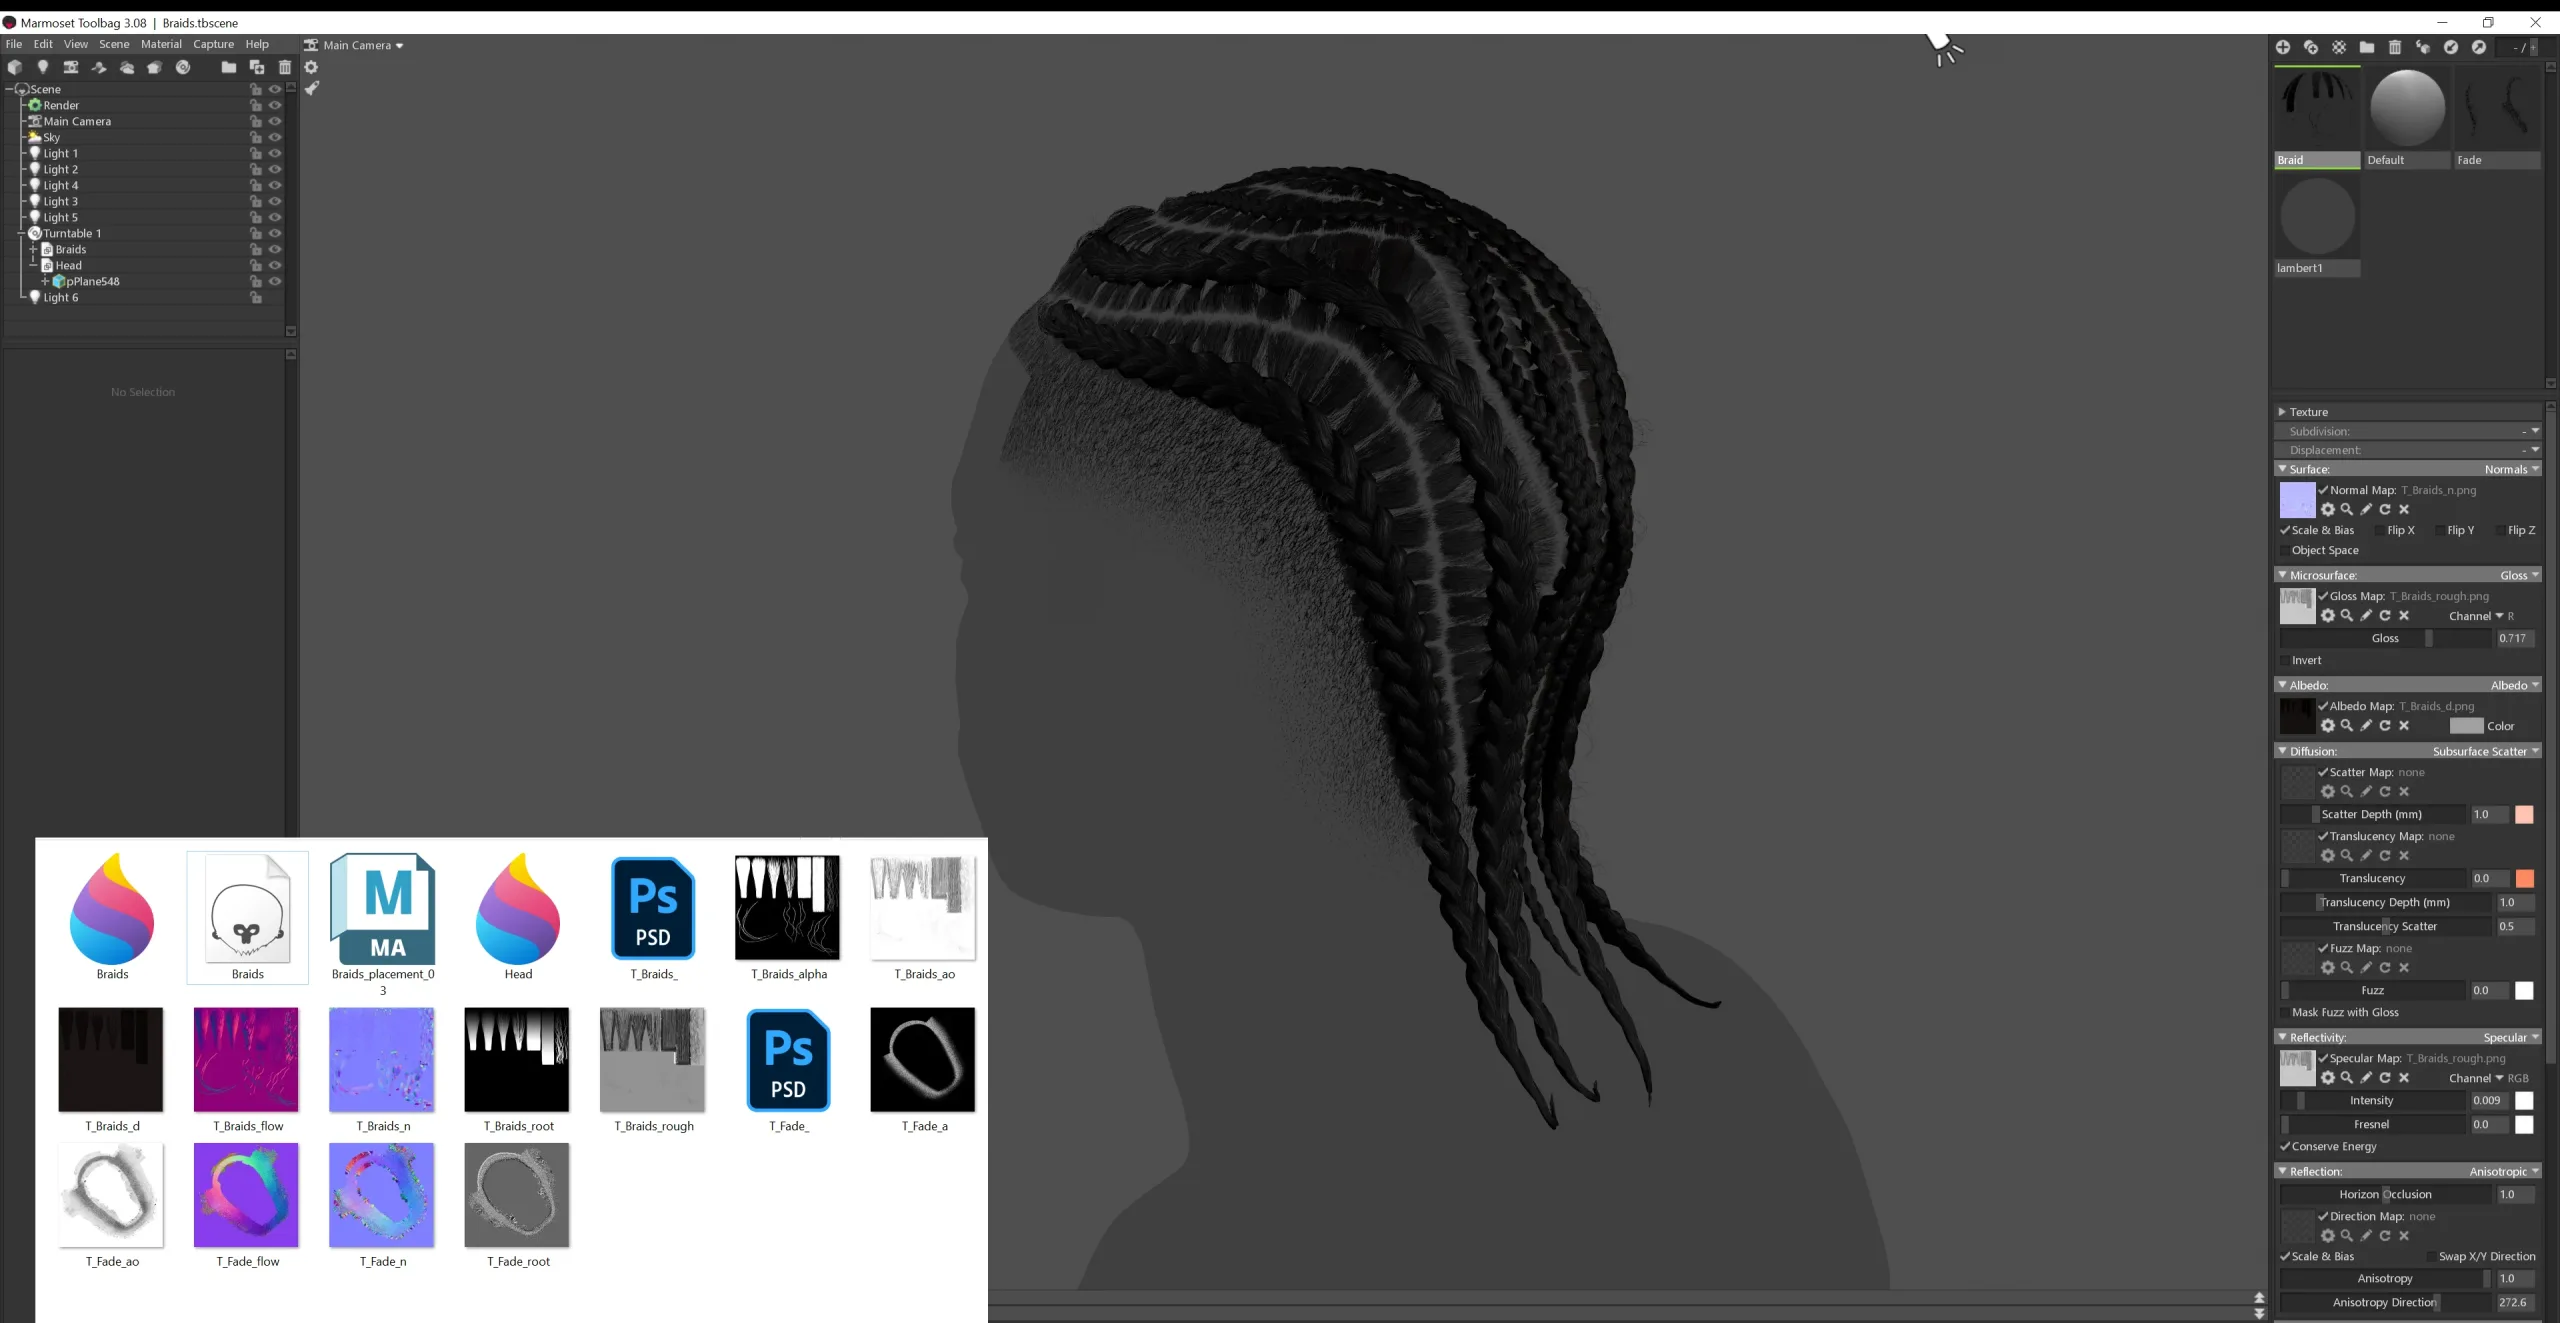 Realtime cornrows/braids - Working files and marmoset scene